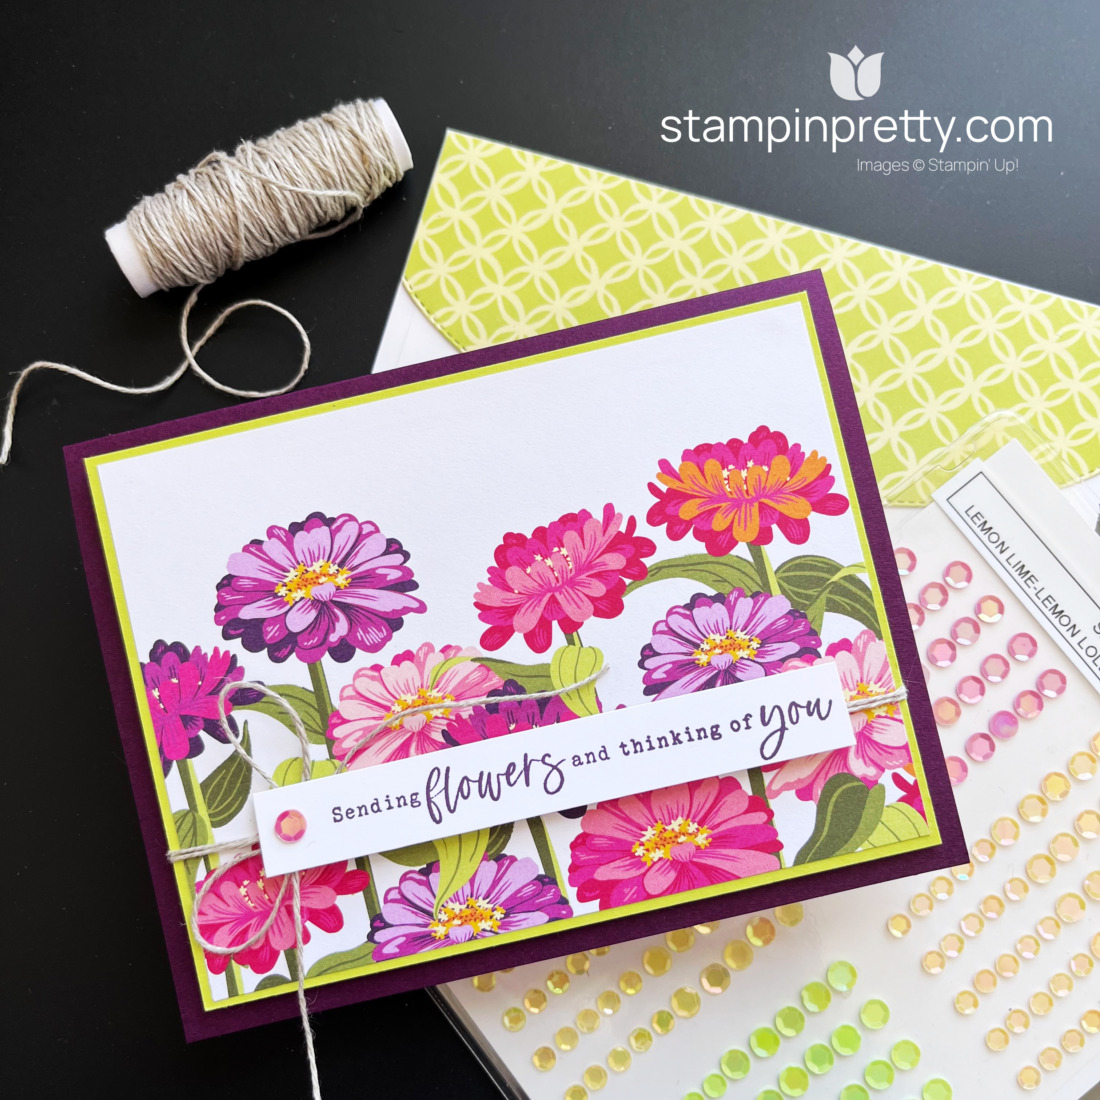 Create this simple card using the Flowering Zinnias Designer Series Paper from Stampin' Up! Card by Mary Fish, Stampin' Pretty